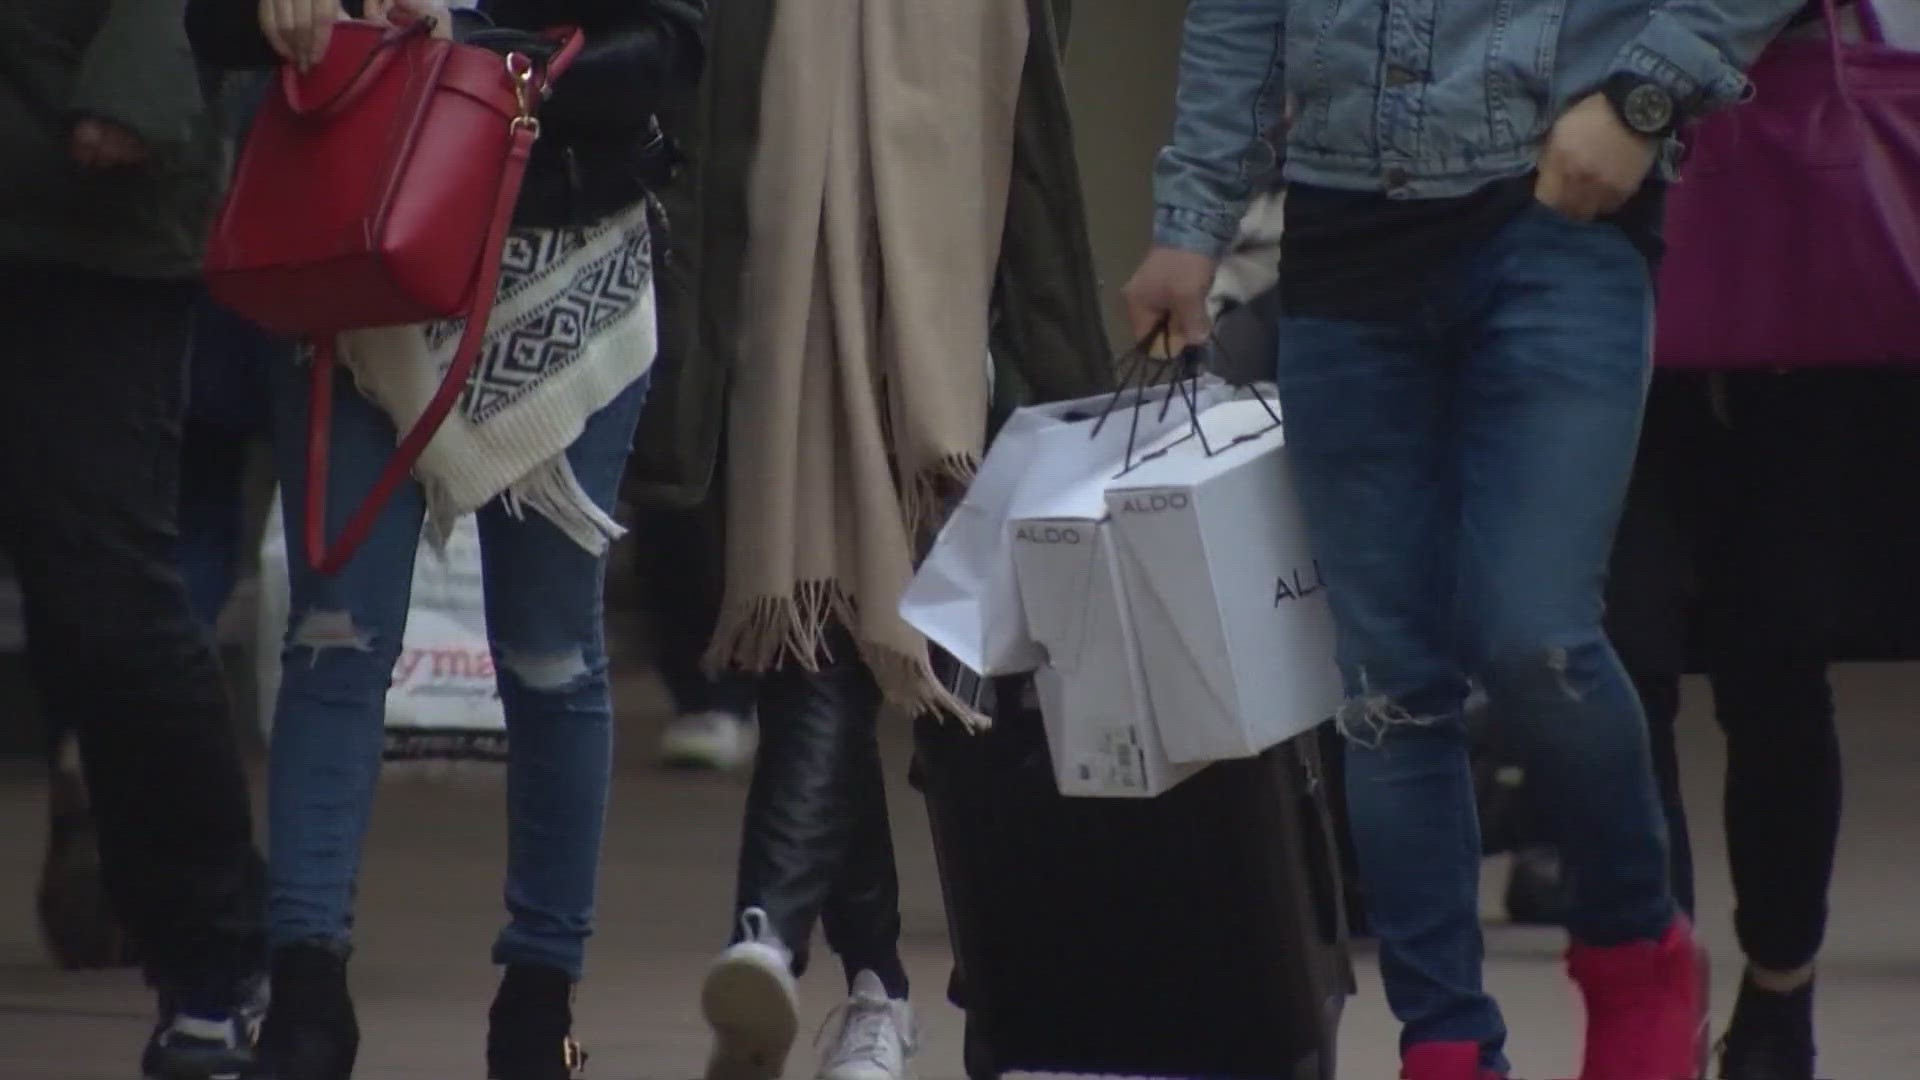 Shoppers were out on Black Friday looking to score the best deals.